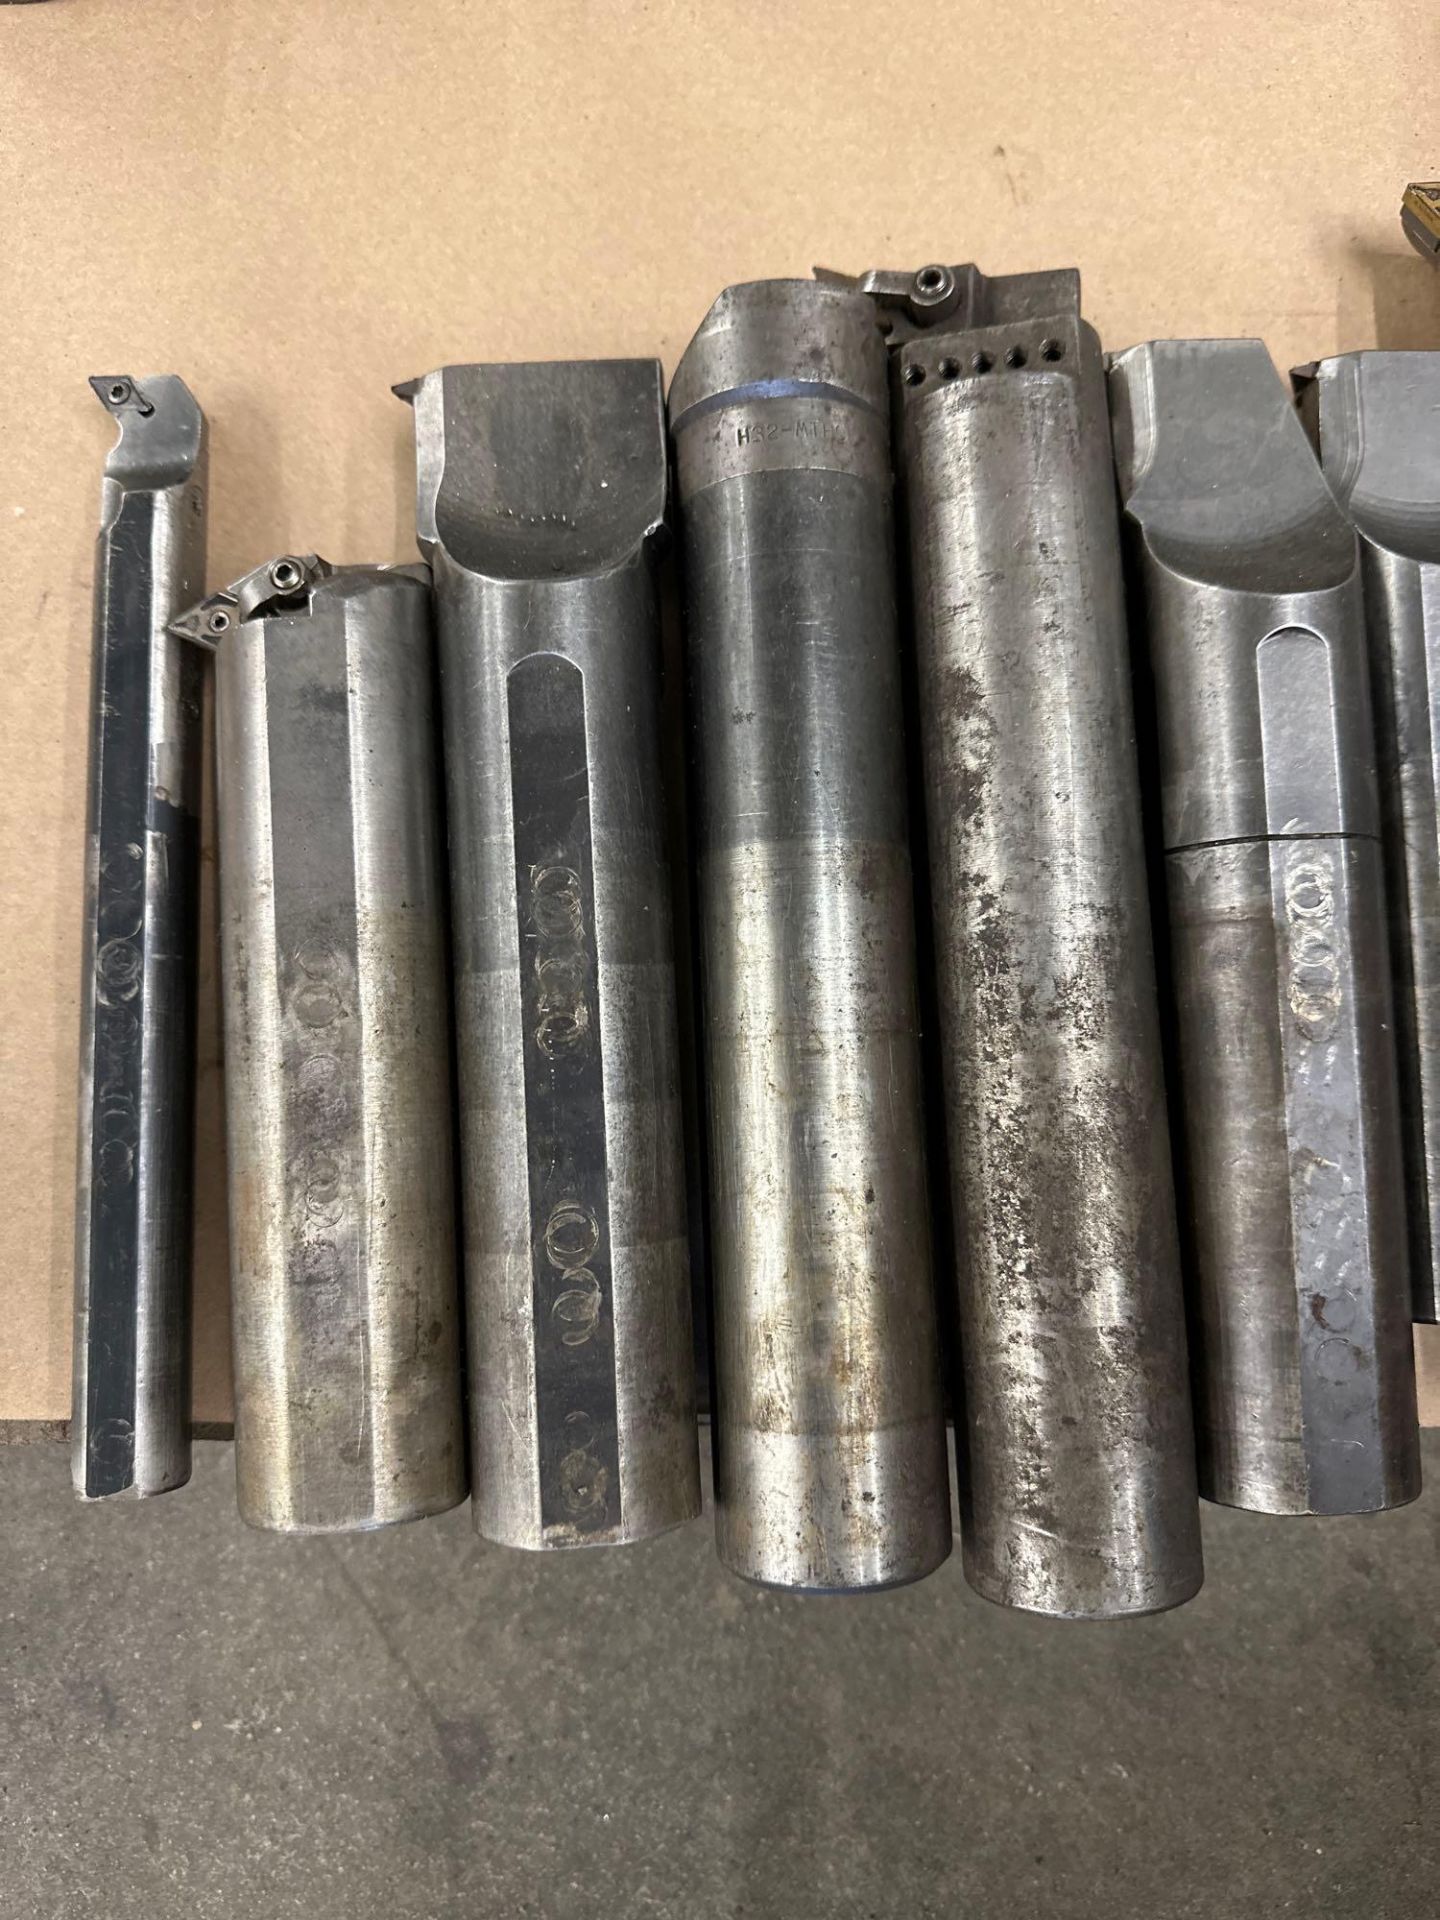 Lot of 10 Assorted Indexable Boring Bars Ranging From: 7/8” X 10 1/4” to 2” X 15 3/4” - Image 4 of 6